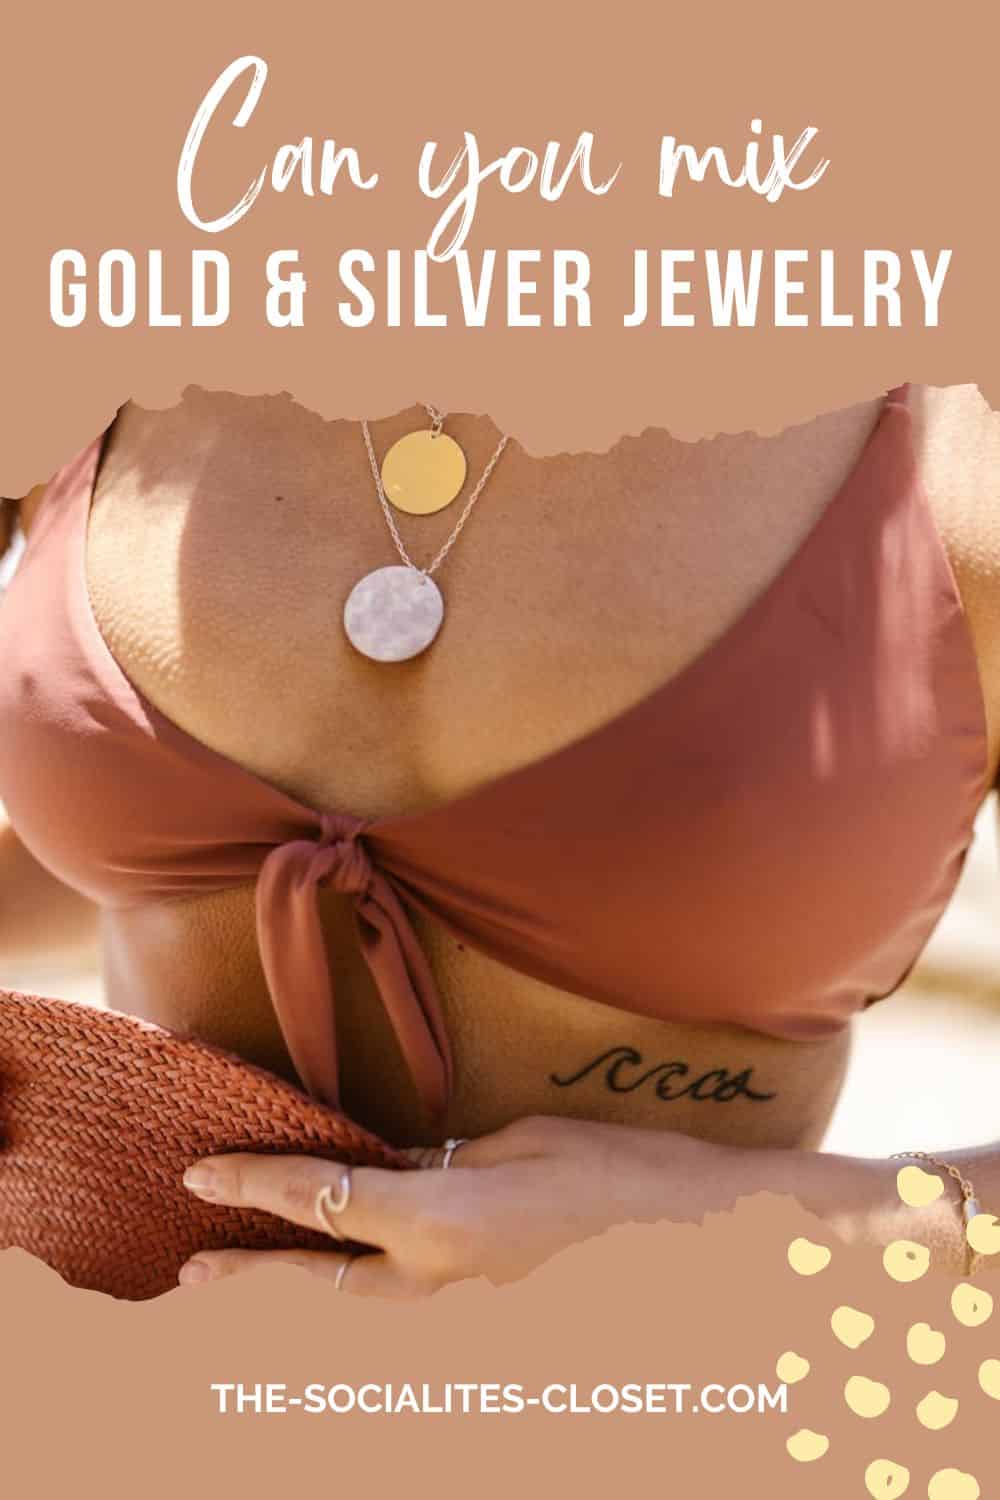 Can you wear gold and silver together? Find out more about mixing metals and wearing gold and silver jewelry together.